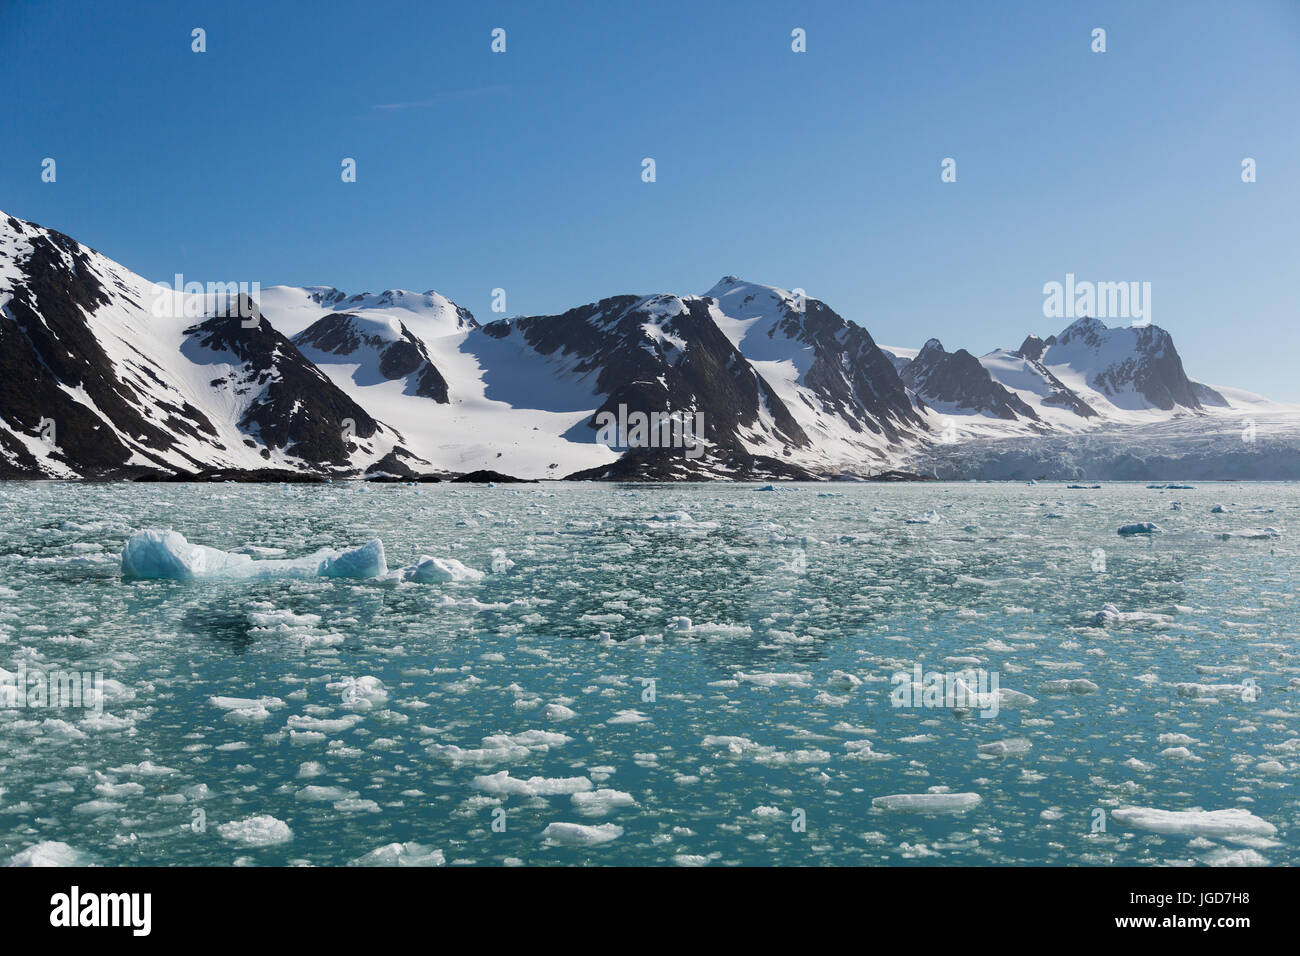 The still, clear water of a bay at the tongue of a glacier is speckled with floating fragments of ice from a recent calving event. Stock Photo